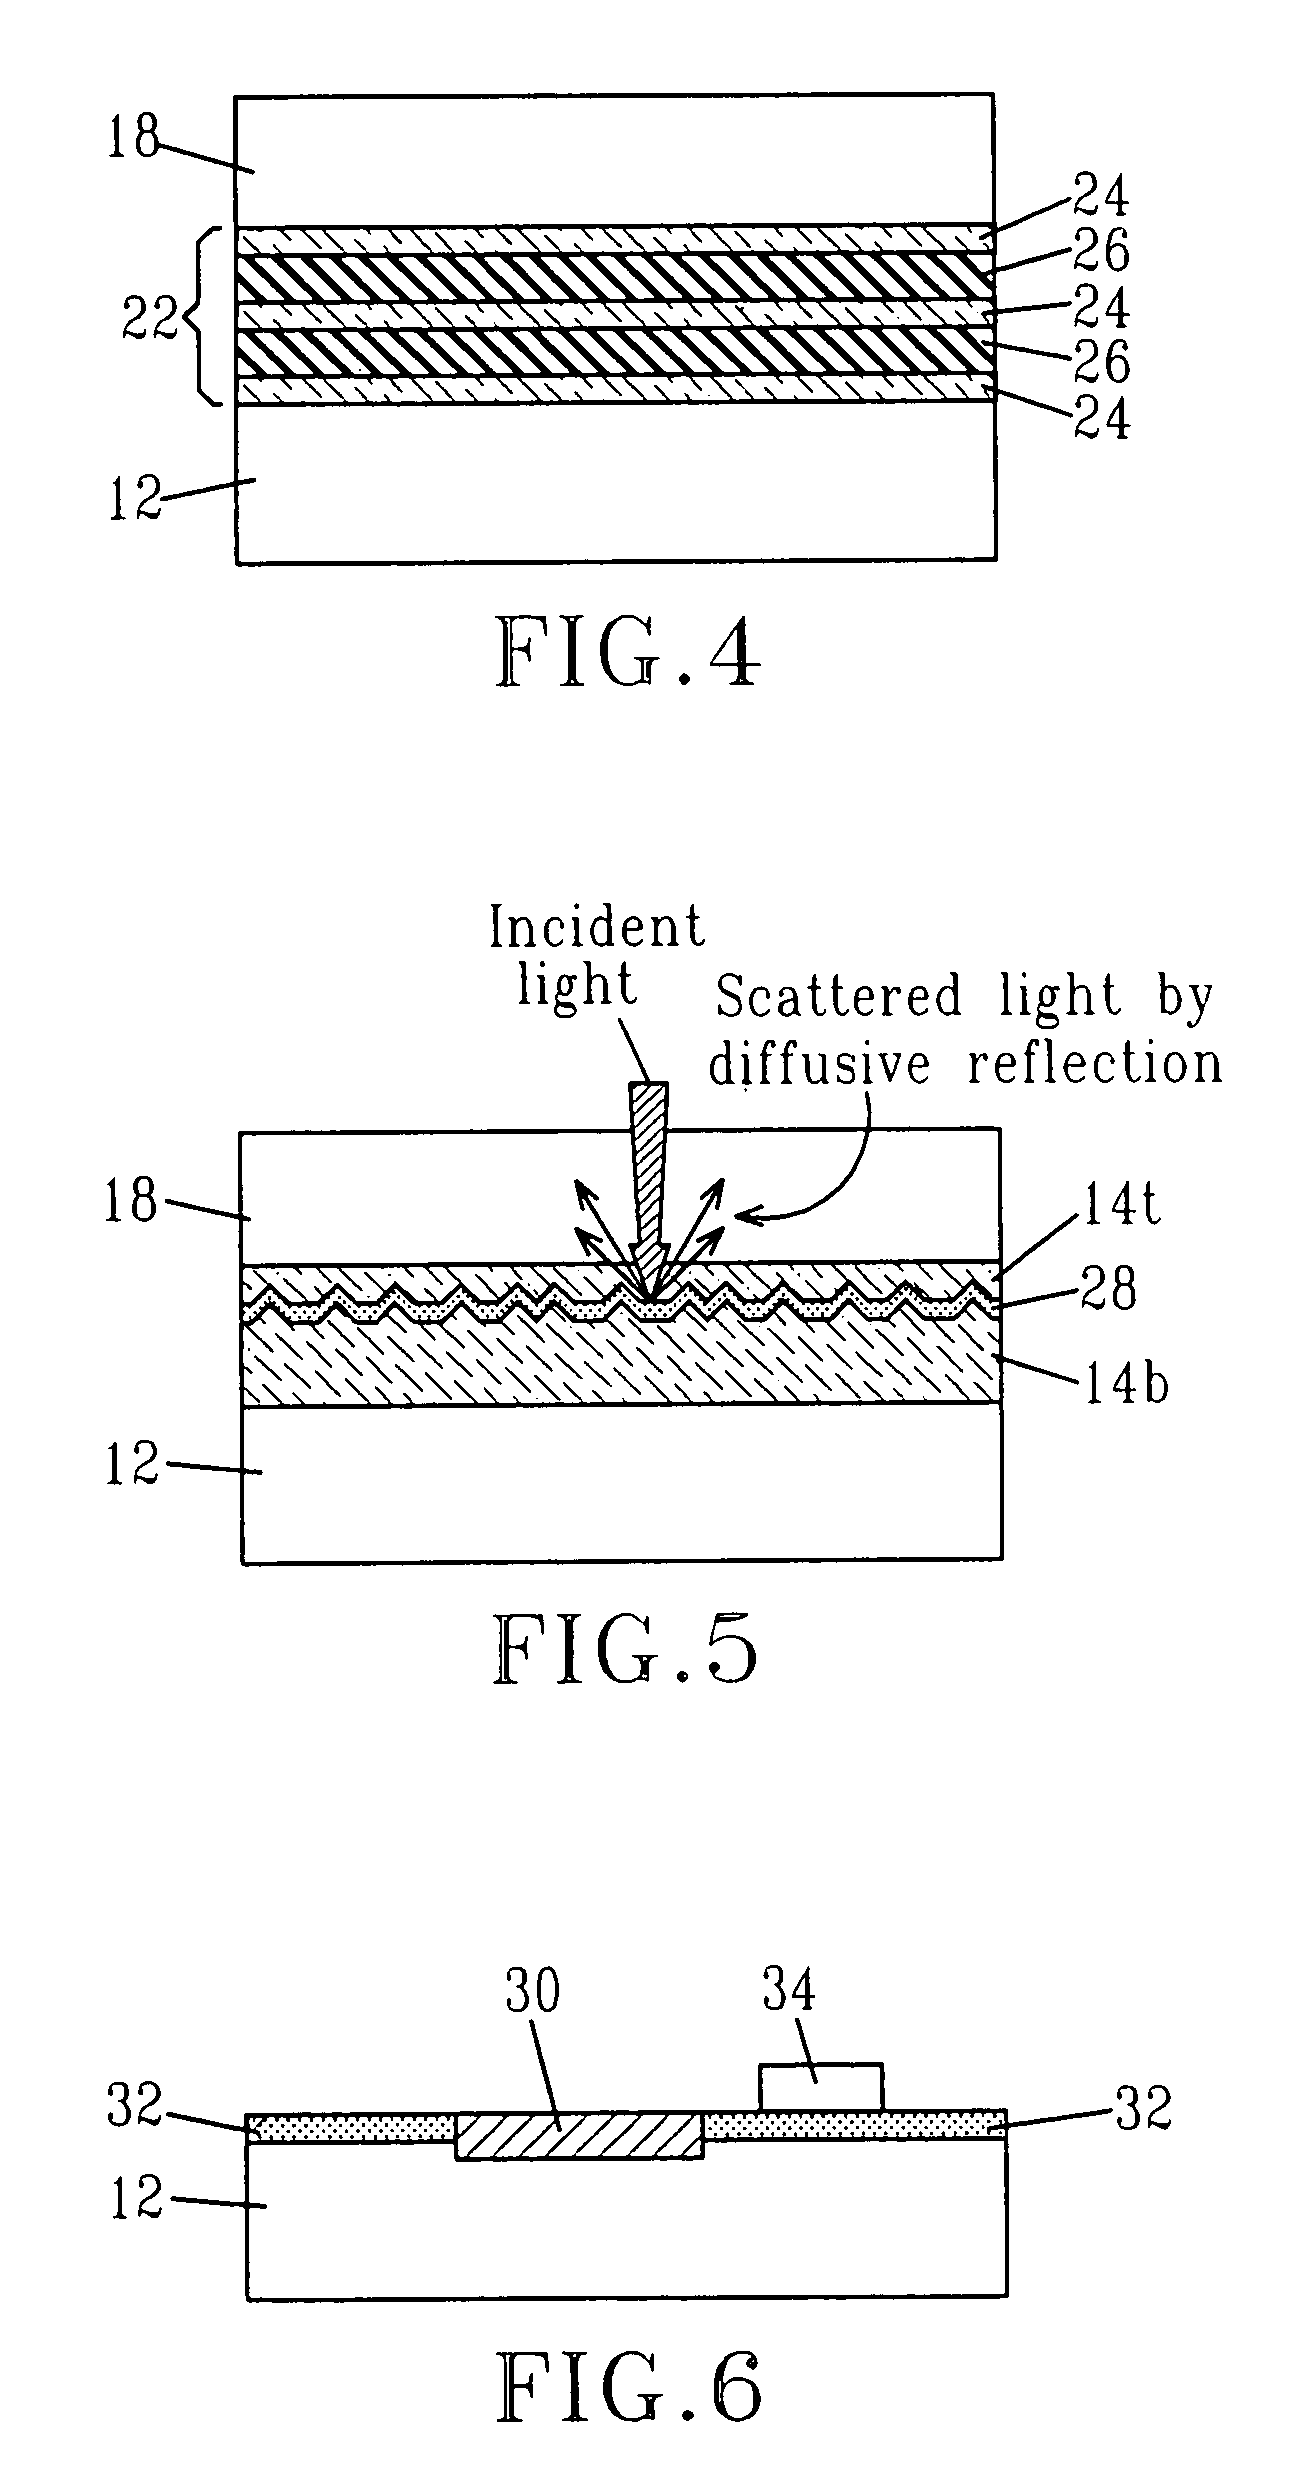 Method for fabricating SiGe-on-insulator (SGOI) and Ge-on-insulator (GOI) substrates